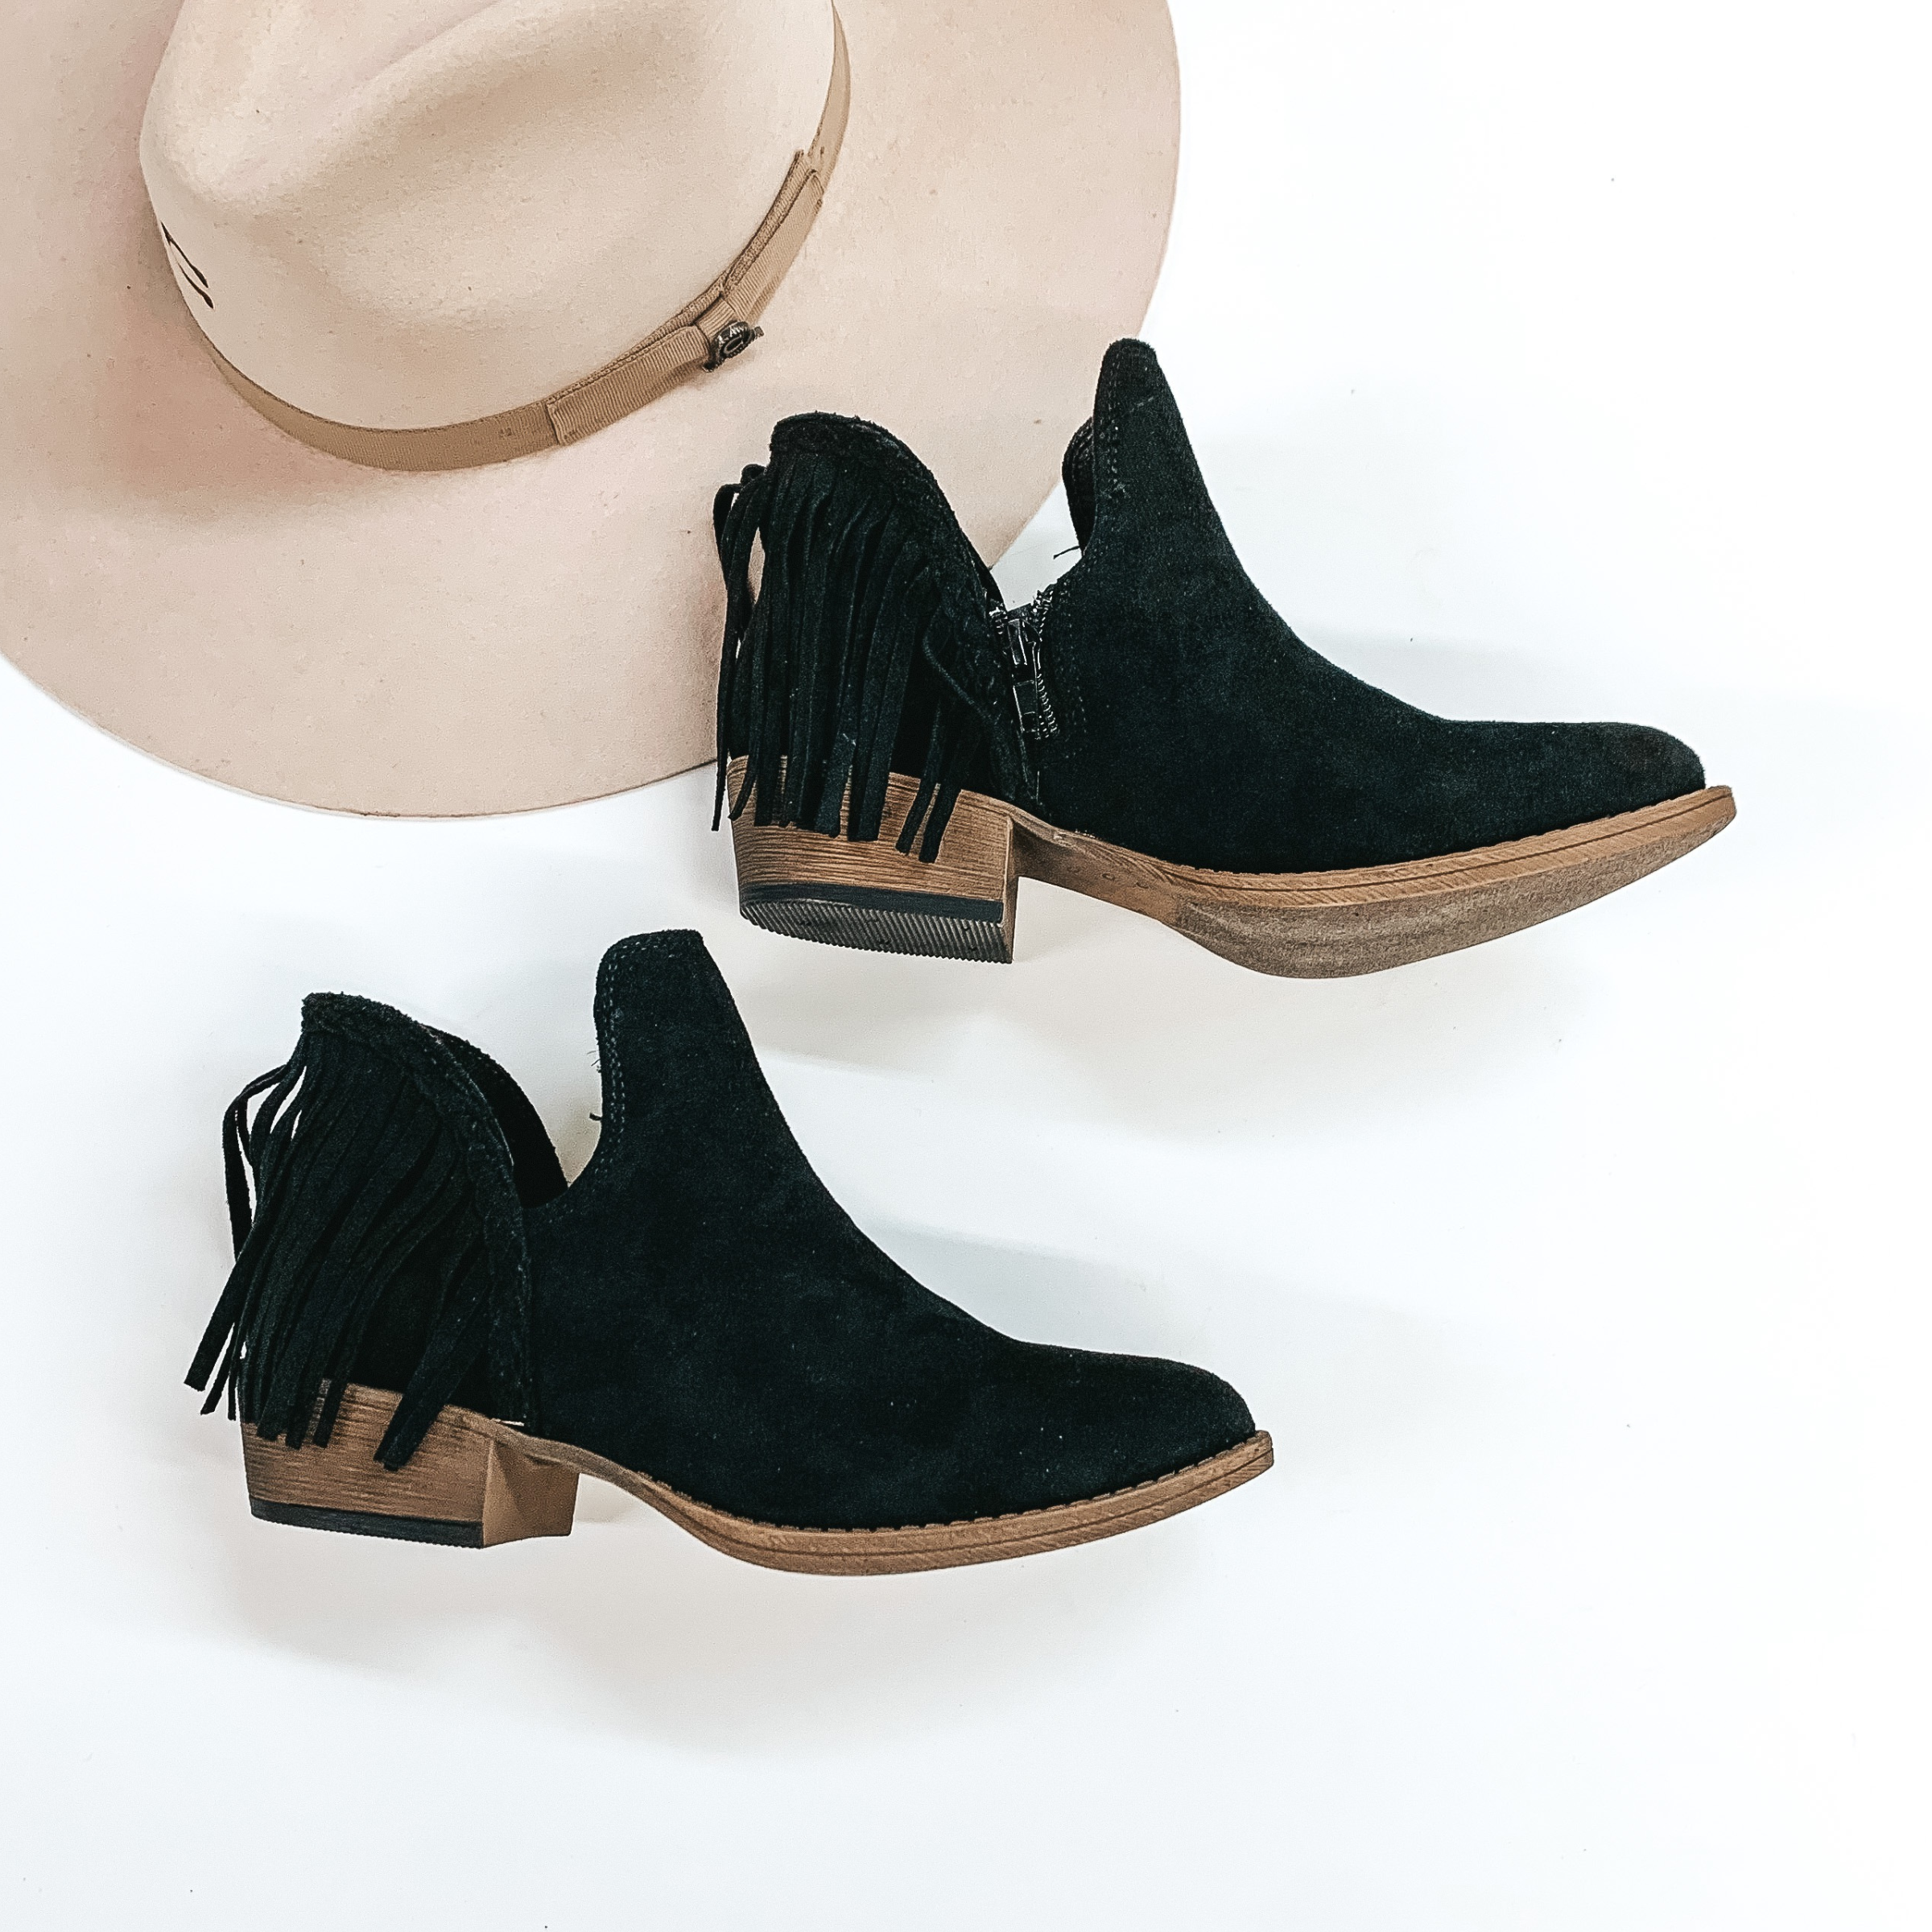 Very G | Be Yourself Heeled Fringe Booties with Cutouts in Black - Giddy Up Glamour Boutique